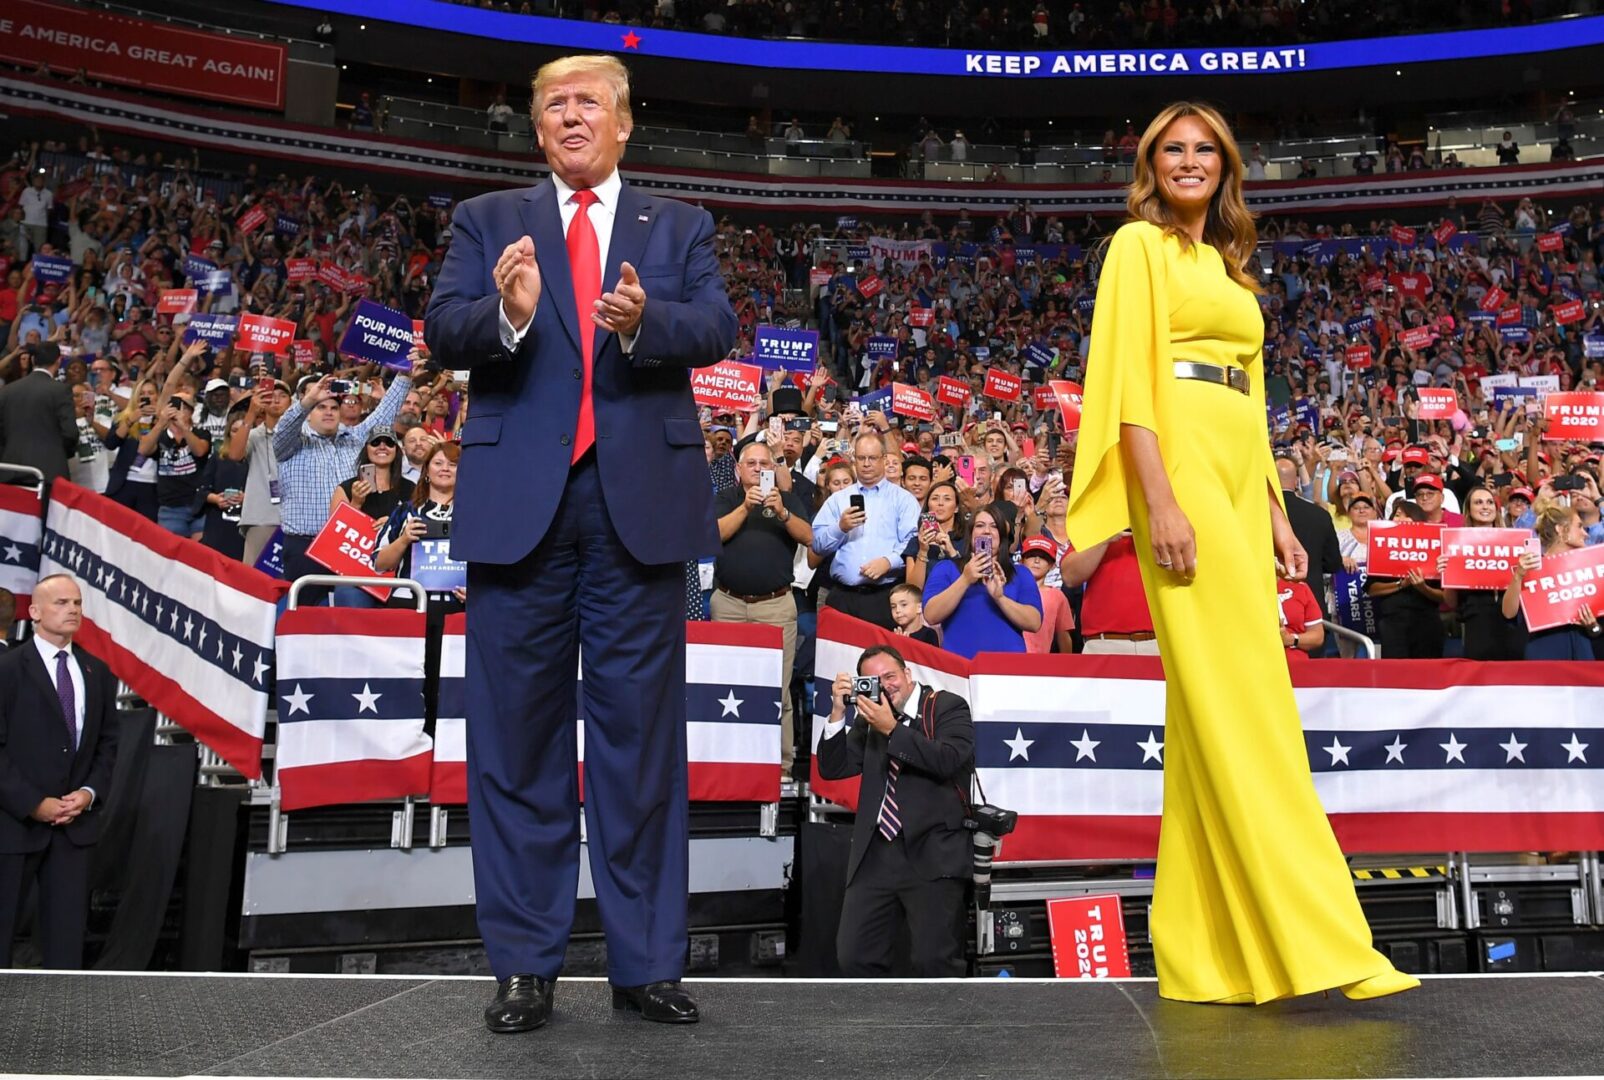 US President Donald Trump and First Lady Melania Trump arrive for the official launch of the Trump 2020 campaign at the Amway Center in Orlando, Florida on June 18, 2019. - Trump kicks off his reelection campaign at what promised to be a rollicking evening rally in Orlando. (Photo by MANDEL NGAN / AFP)        (Photo credit should read MANDEL NGAN/AFP via Getty Images)